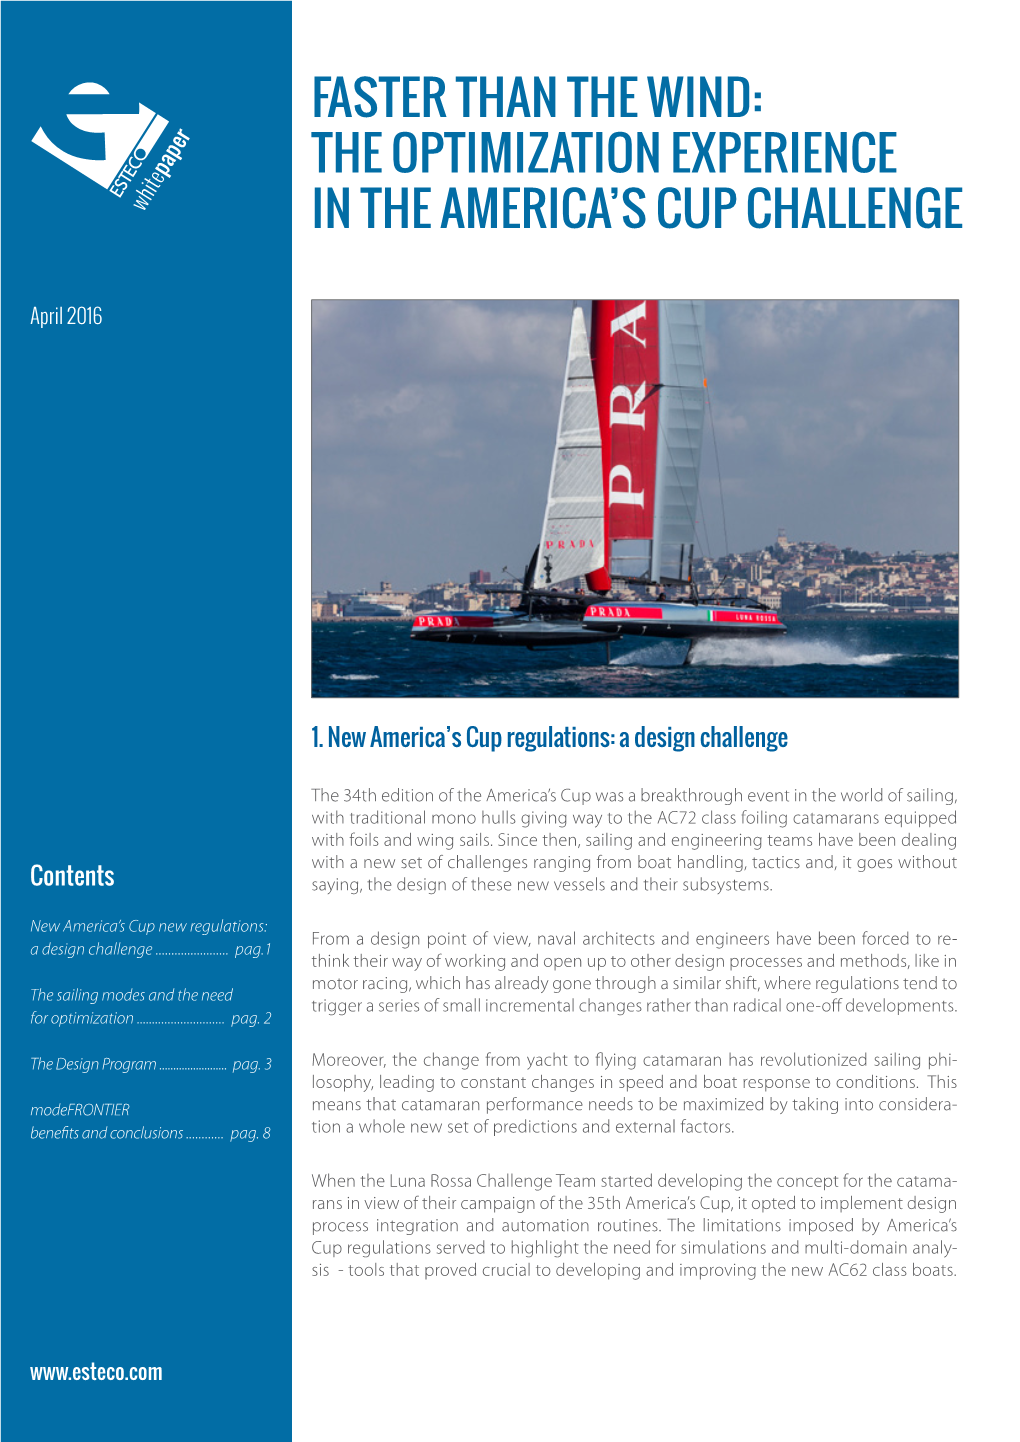 Faster Than the Wind: the Optimization Experience in the America's CUP Challenge